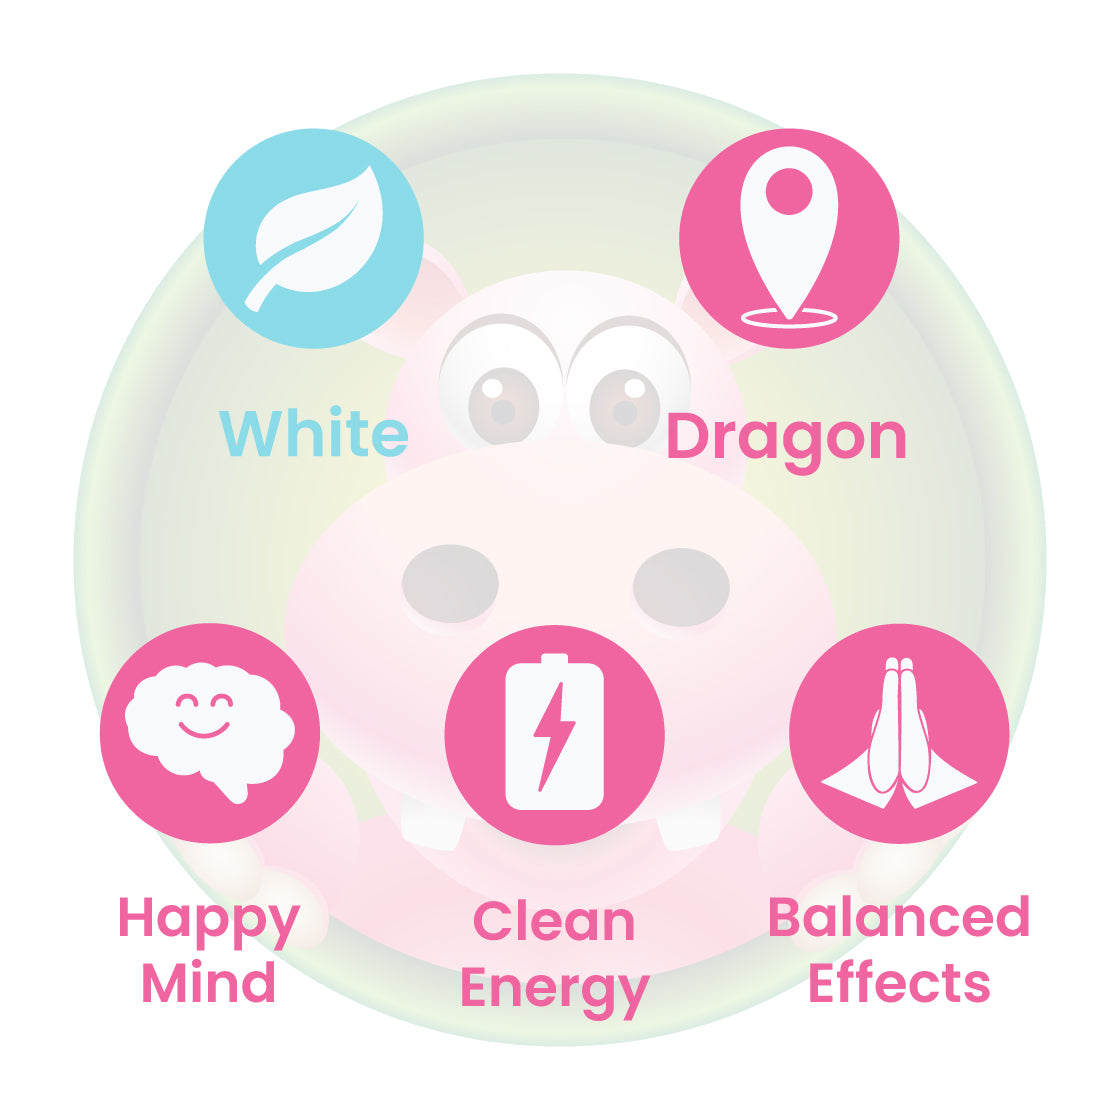 Infographic Details for Happy Hippo Blended White Vein Maeng Da / White Elephant (White Dragon) Kratom Powder. Leaf color: White Vein. Kratom Strain Origin: Maeng Da and Malay. Kratom Effects resonate with Happy Mind, Clean Energy, and Balanced Effects.